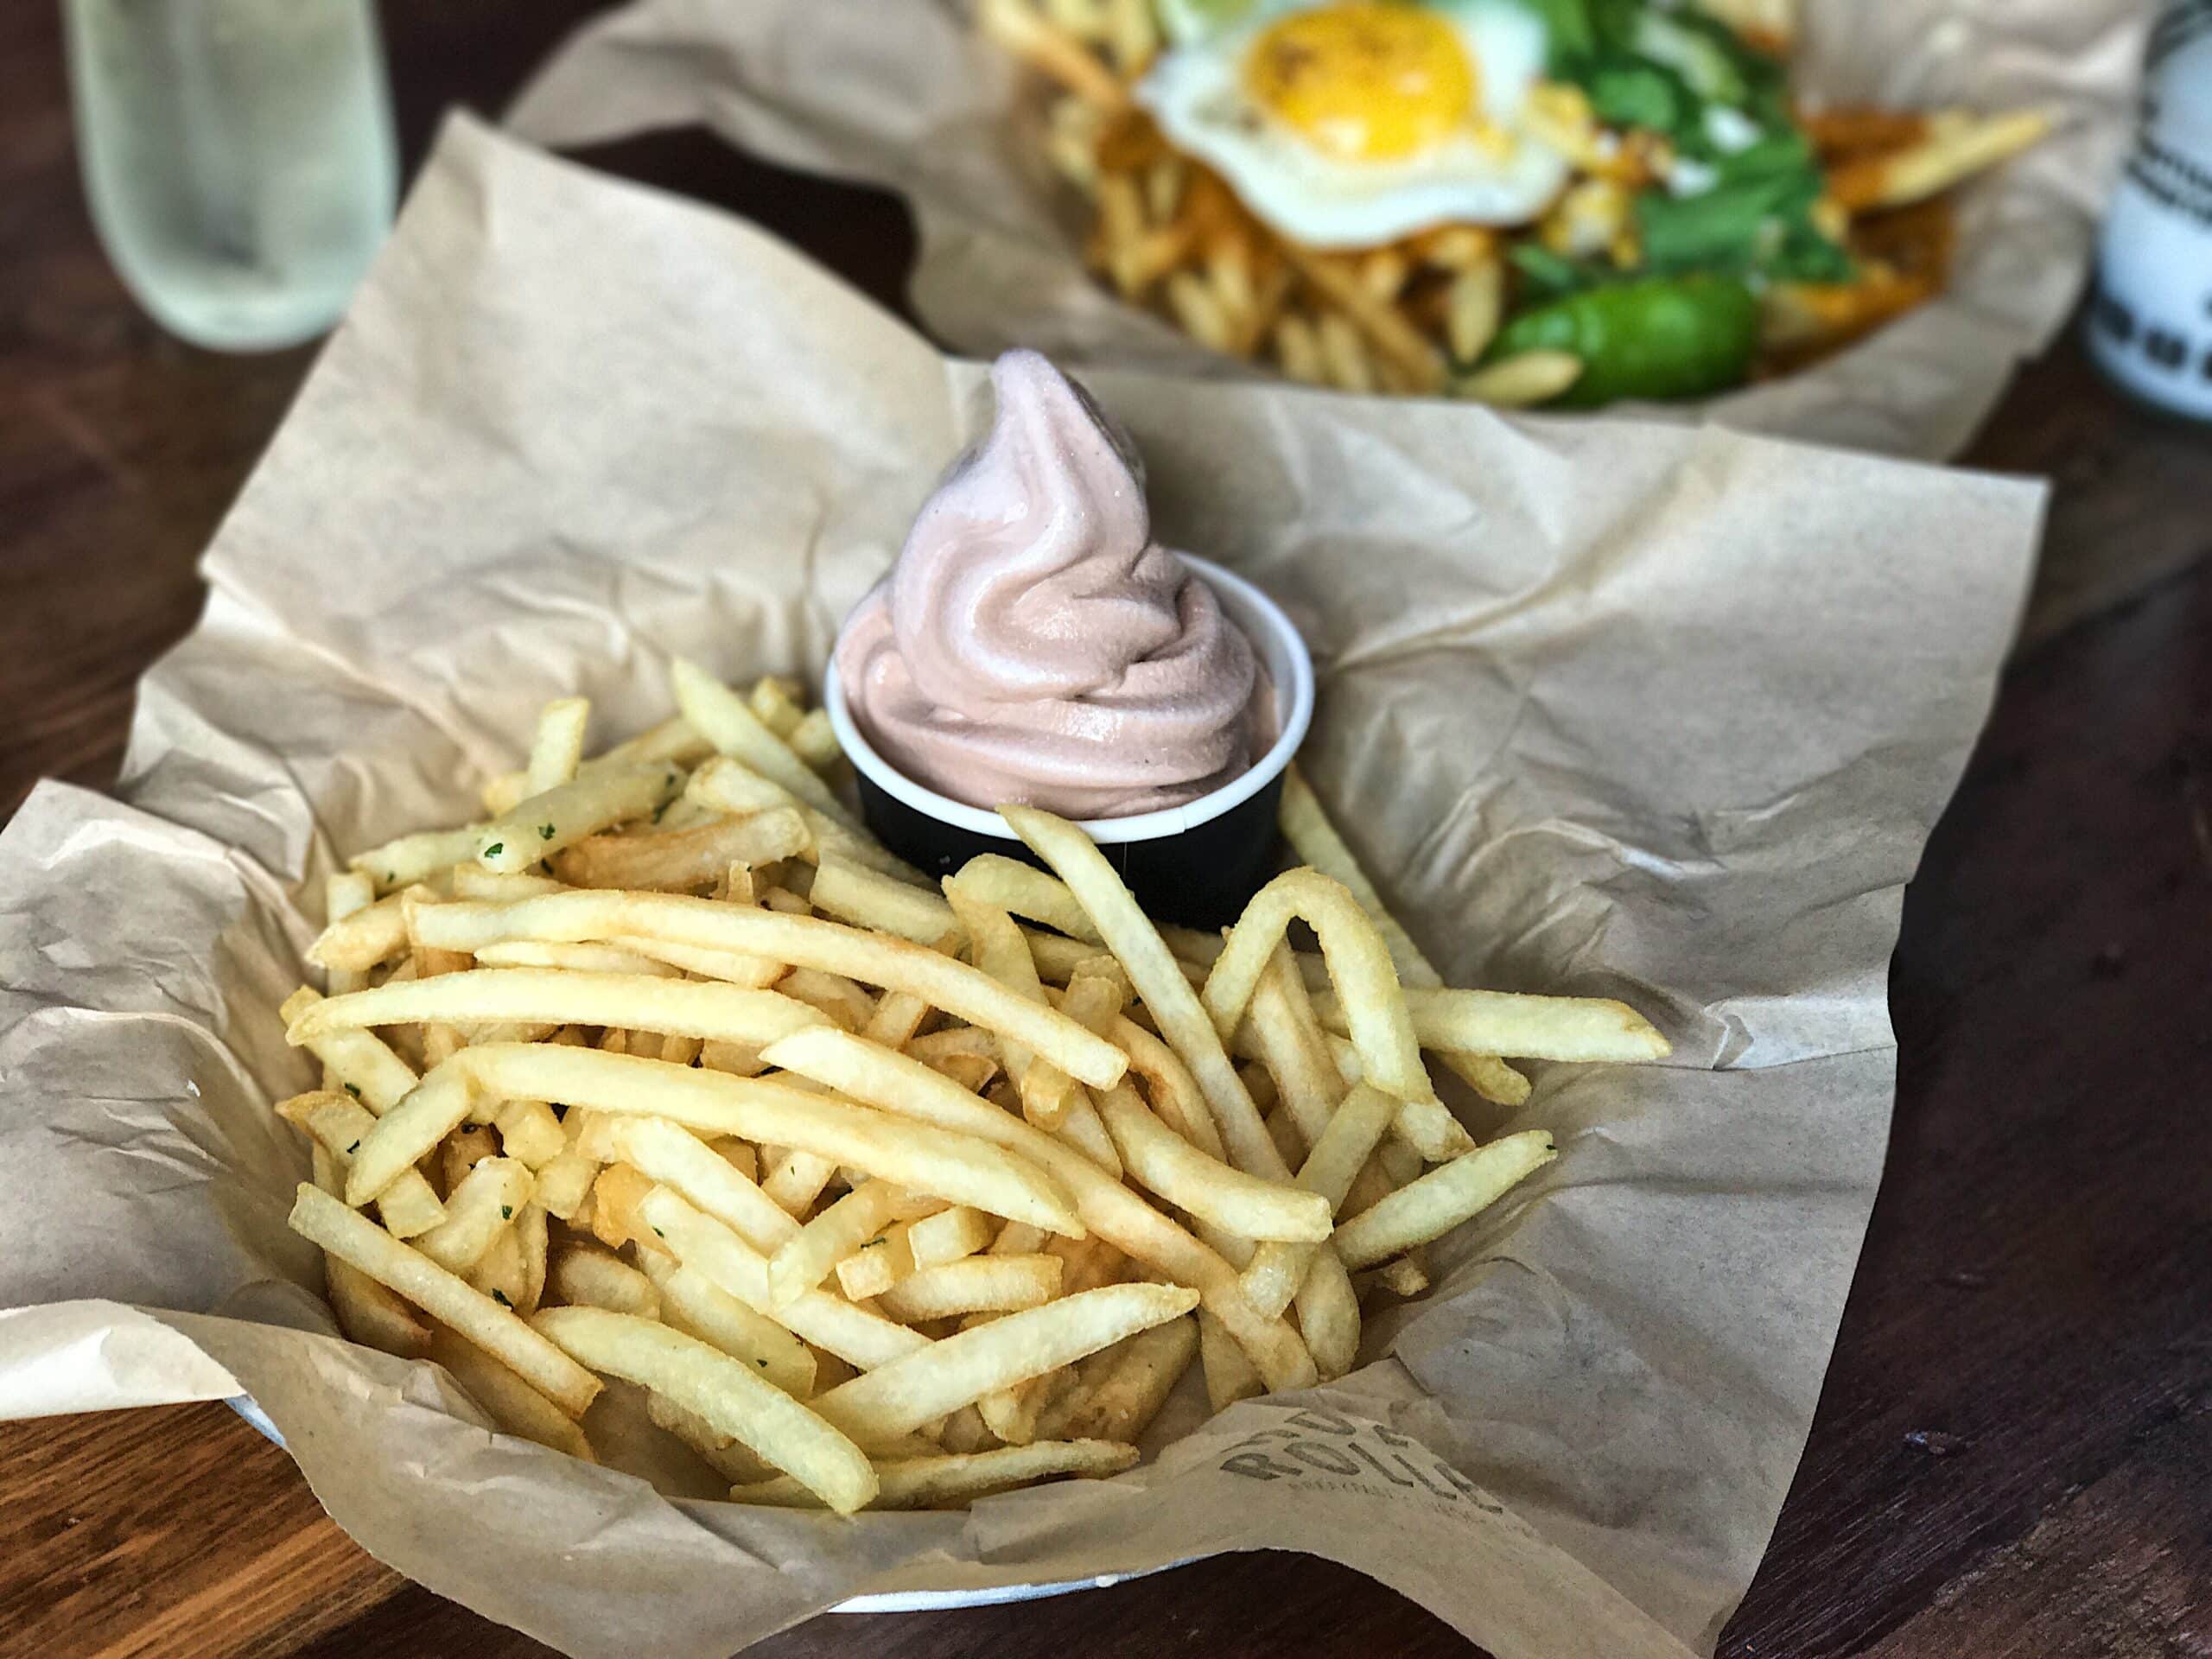 Holy Roller Soft Serve and Fries in Austin